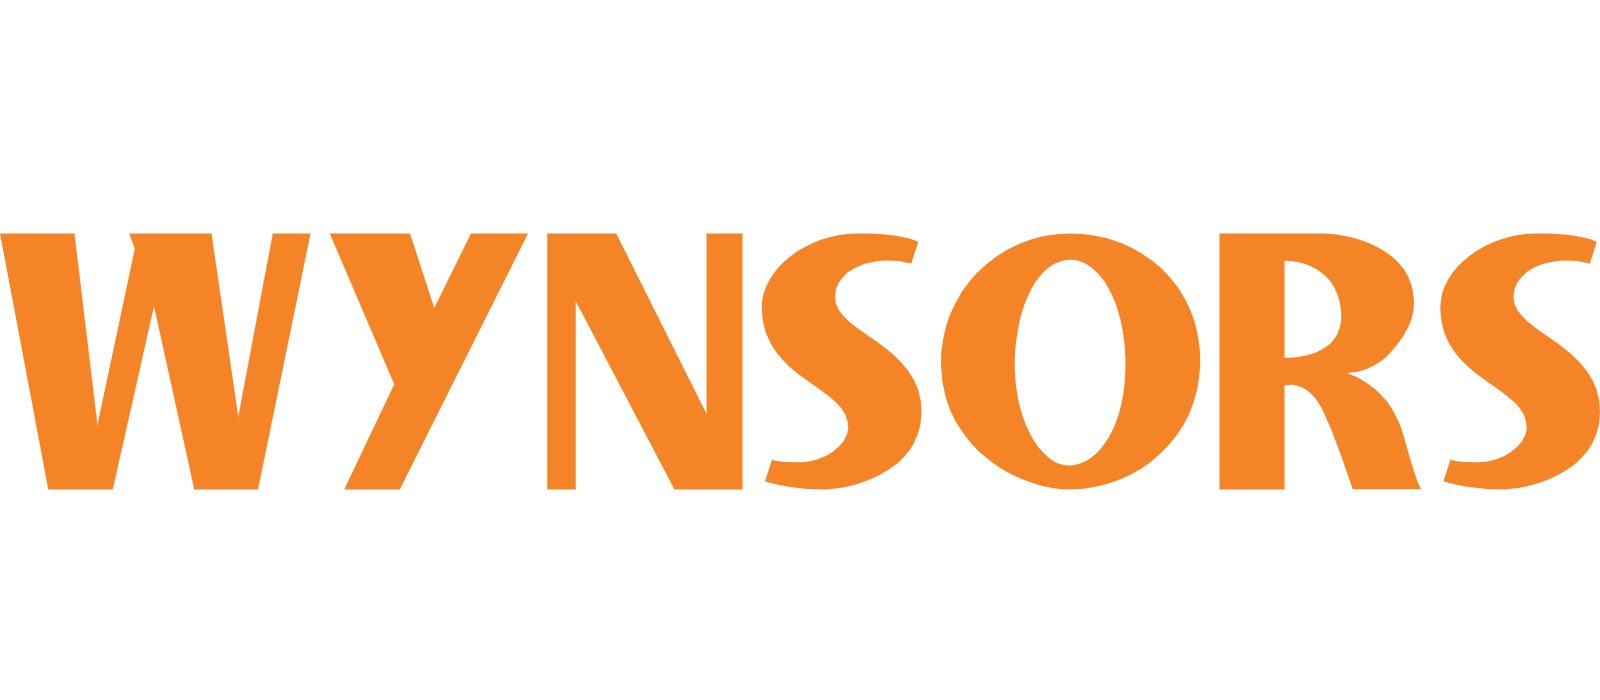 Wynsors Coupons & Promo Codes